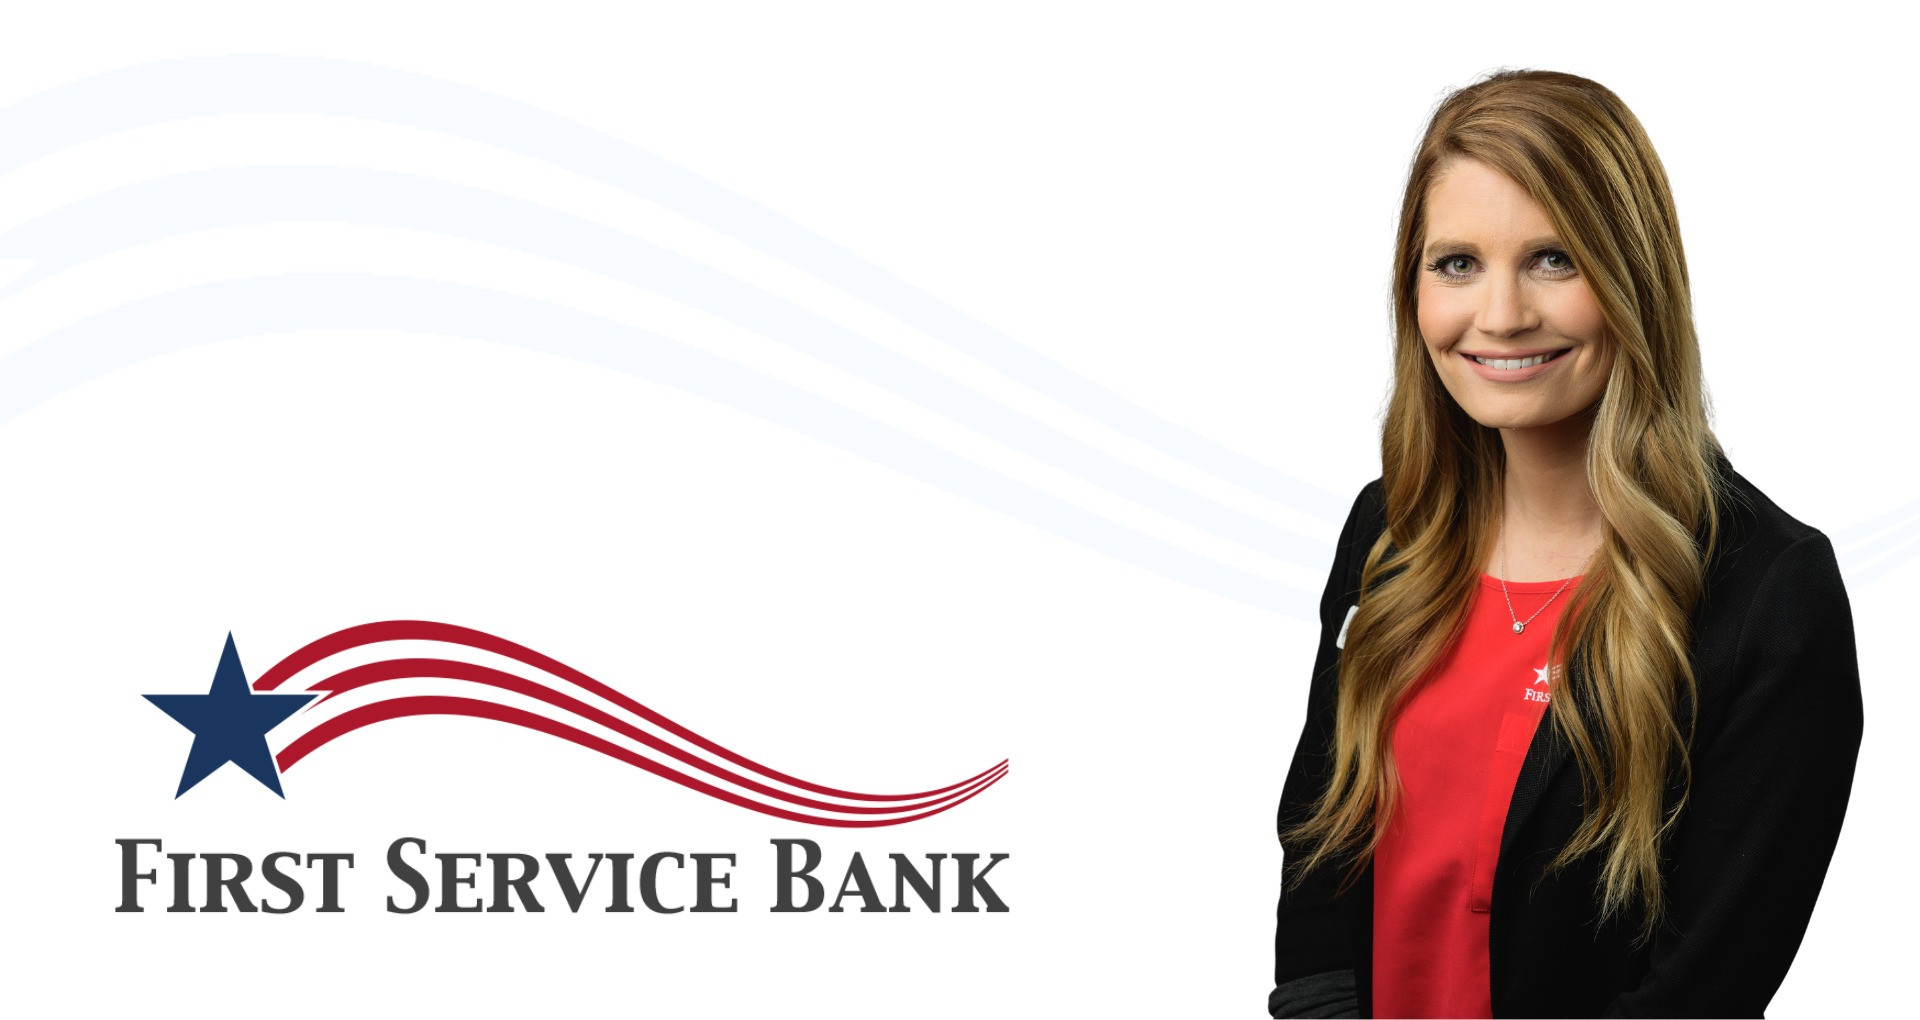 First Service Bank Appoints Morgan Miller as Mortgage Department Assistant Manager and Senior Mortgage Loan Officer